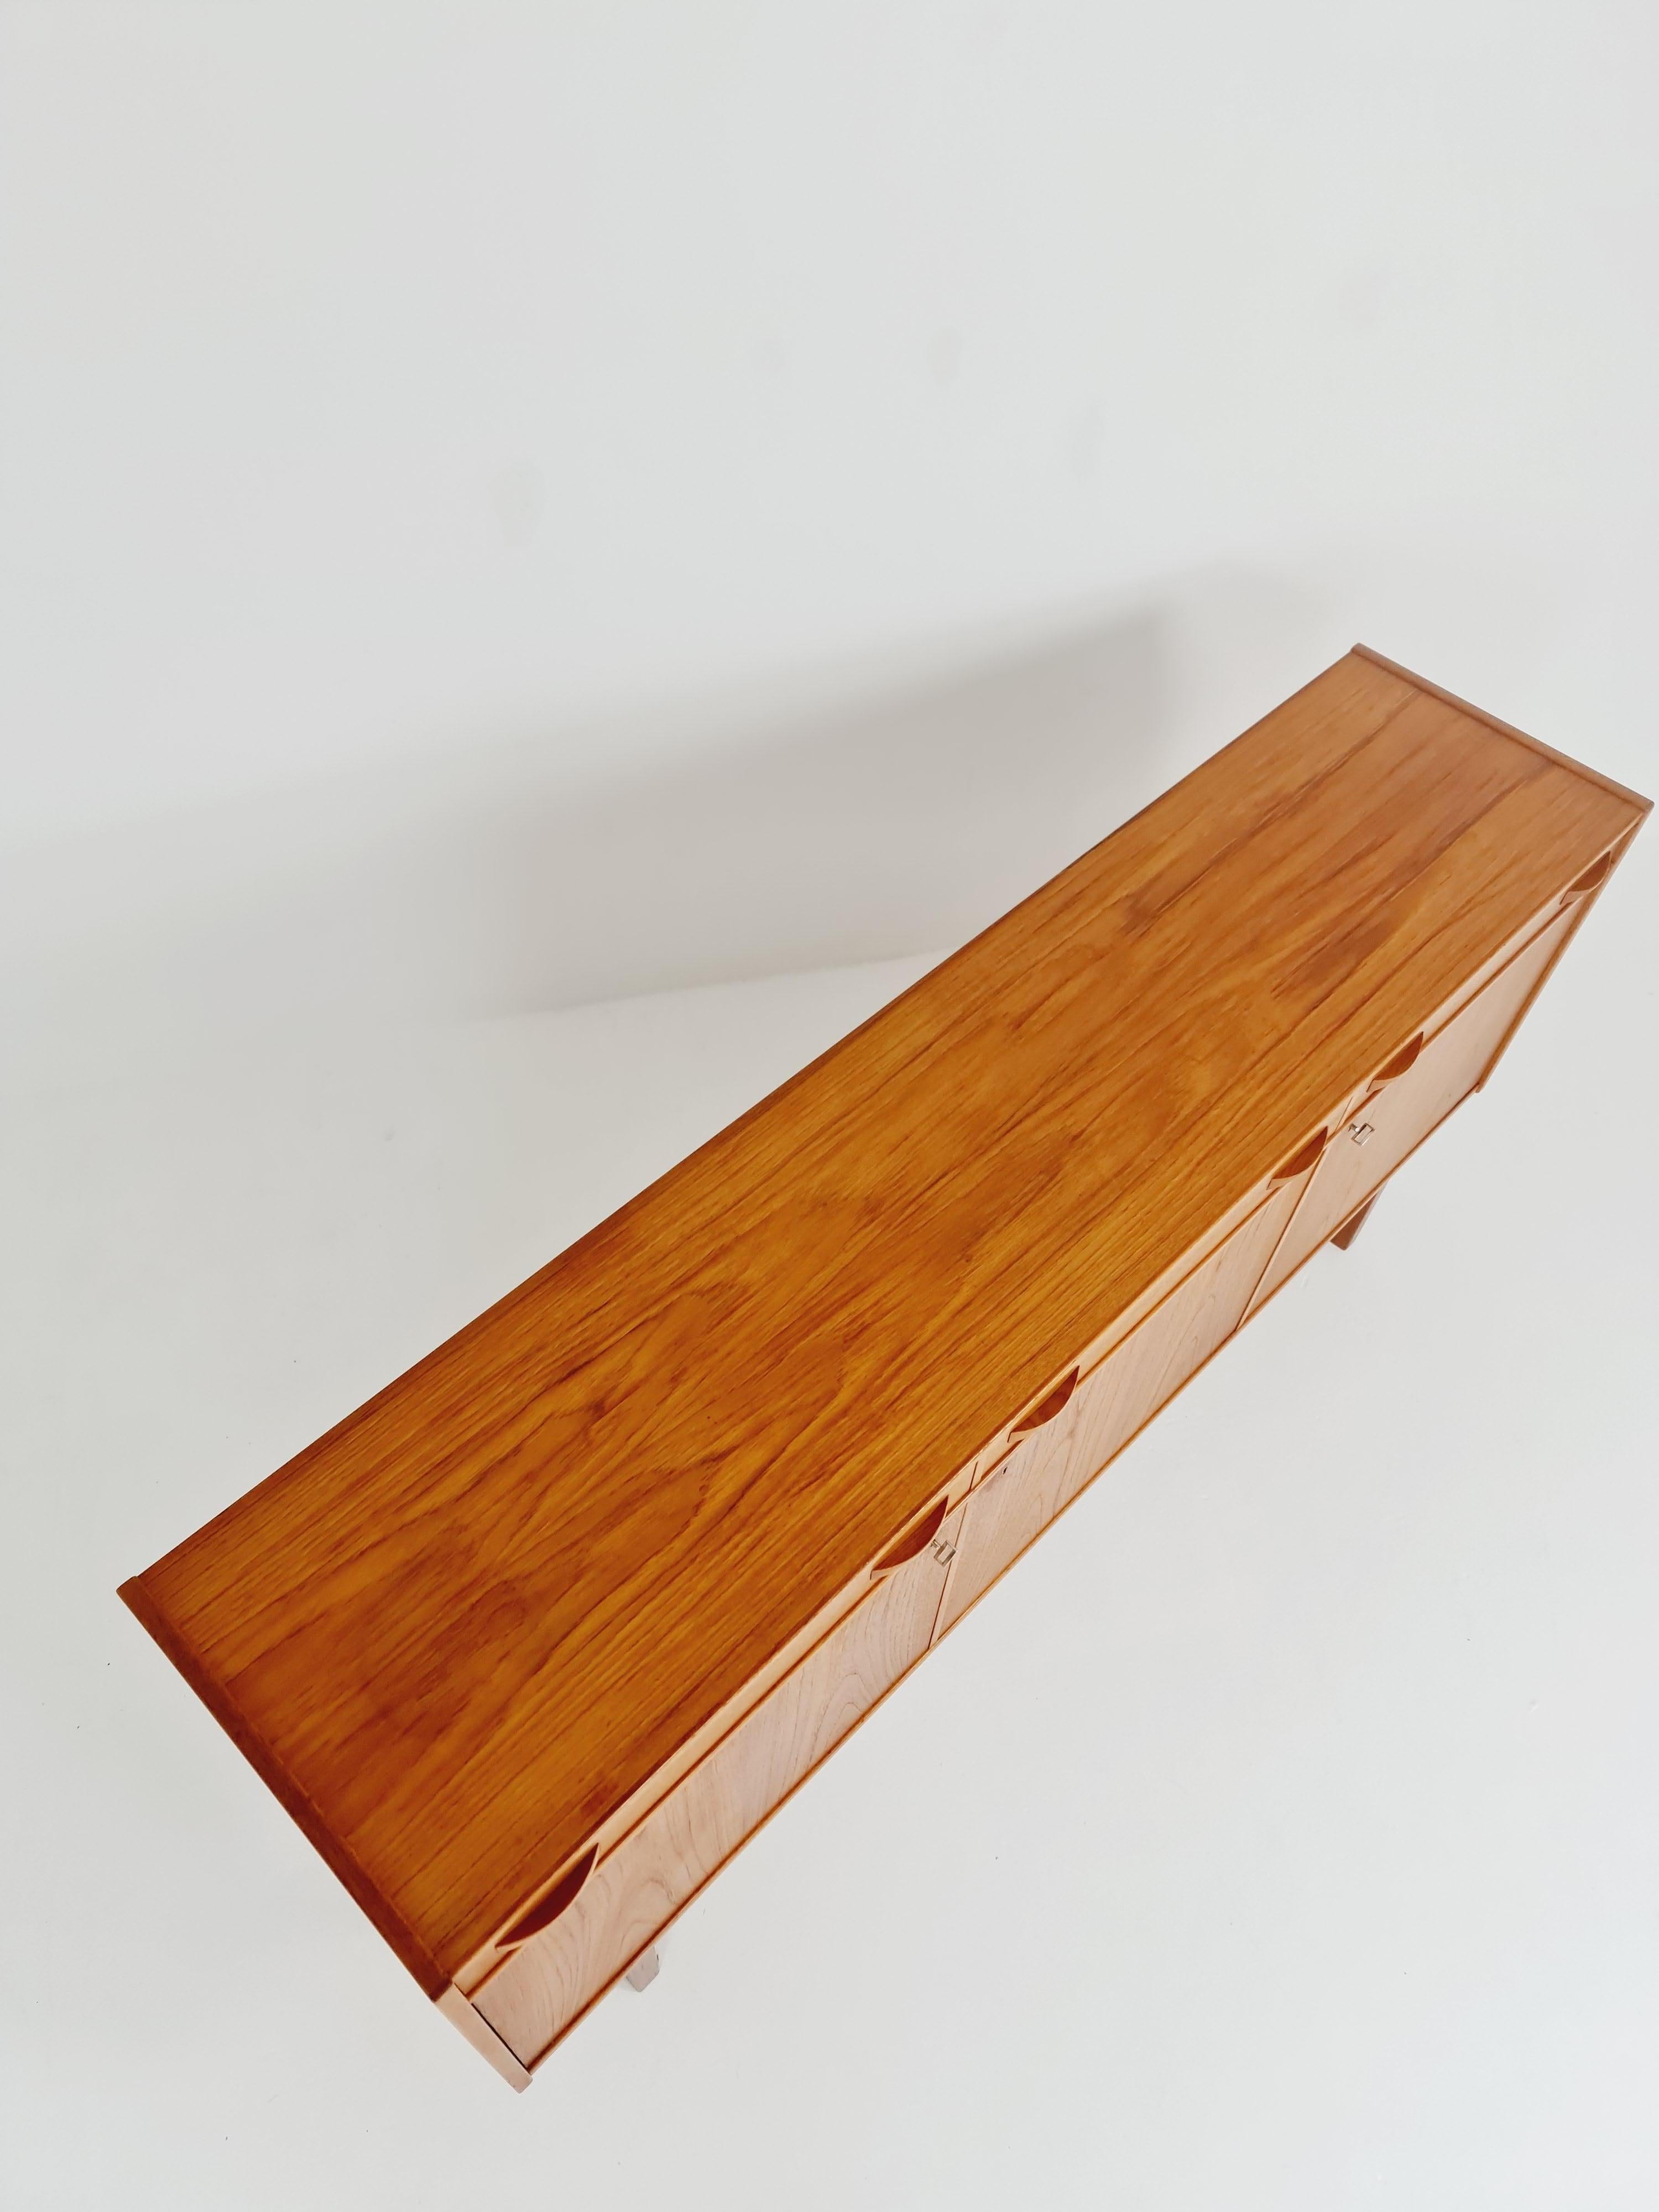 Mid century Swedish Teak Sideboard by Tage Olofsson for Ulferts, 1960s For Sale 4